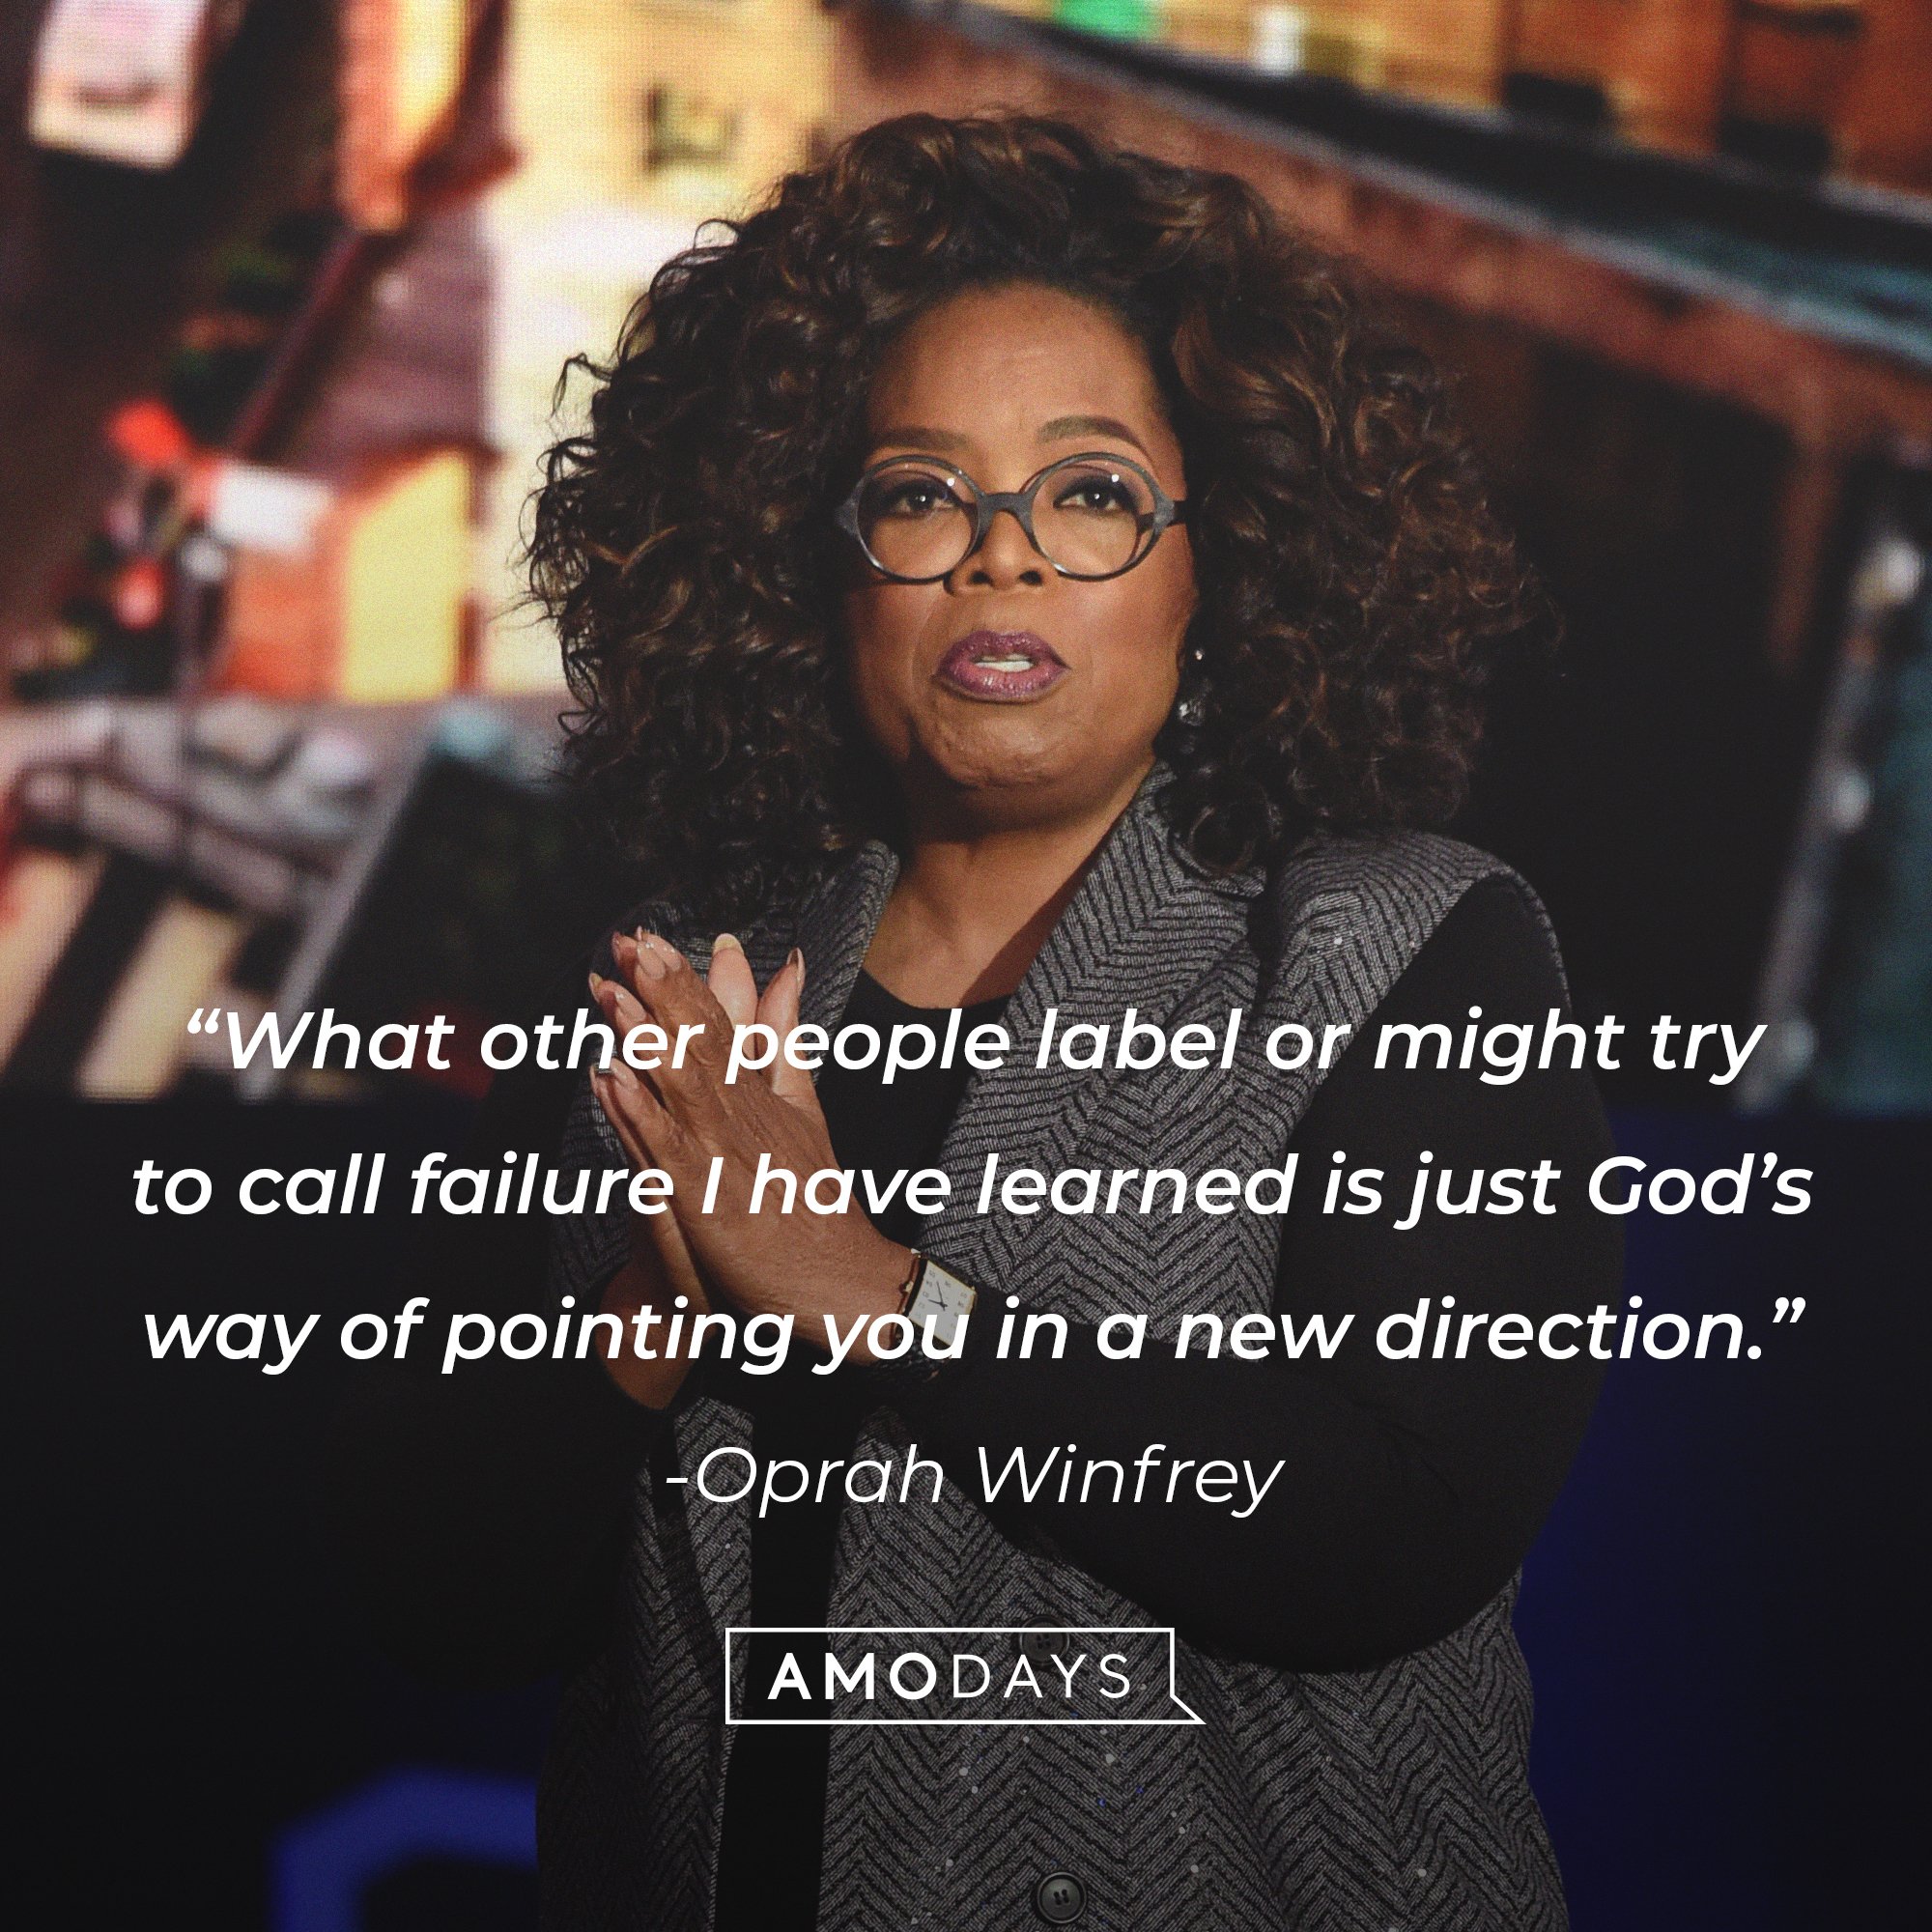 Oprah Winfrey's quote: "What other people label or might try call failure I have learned is just God's way of pointing you in a new direction." | Image: AmoDays